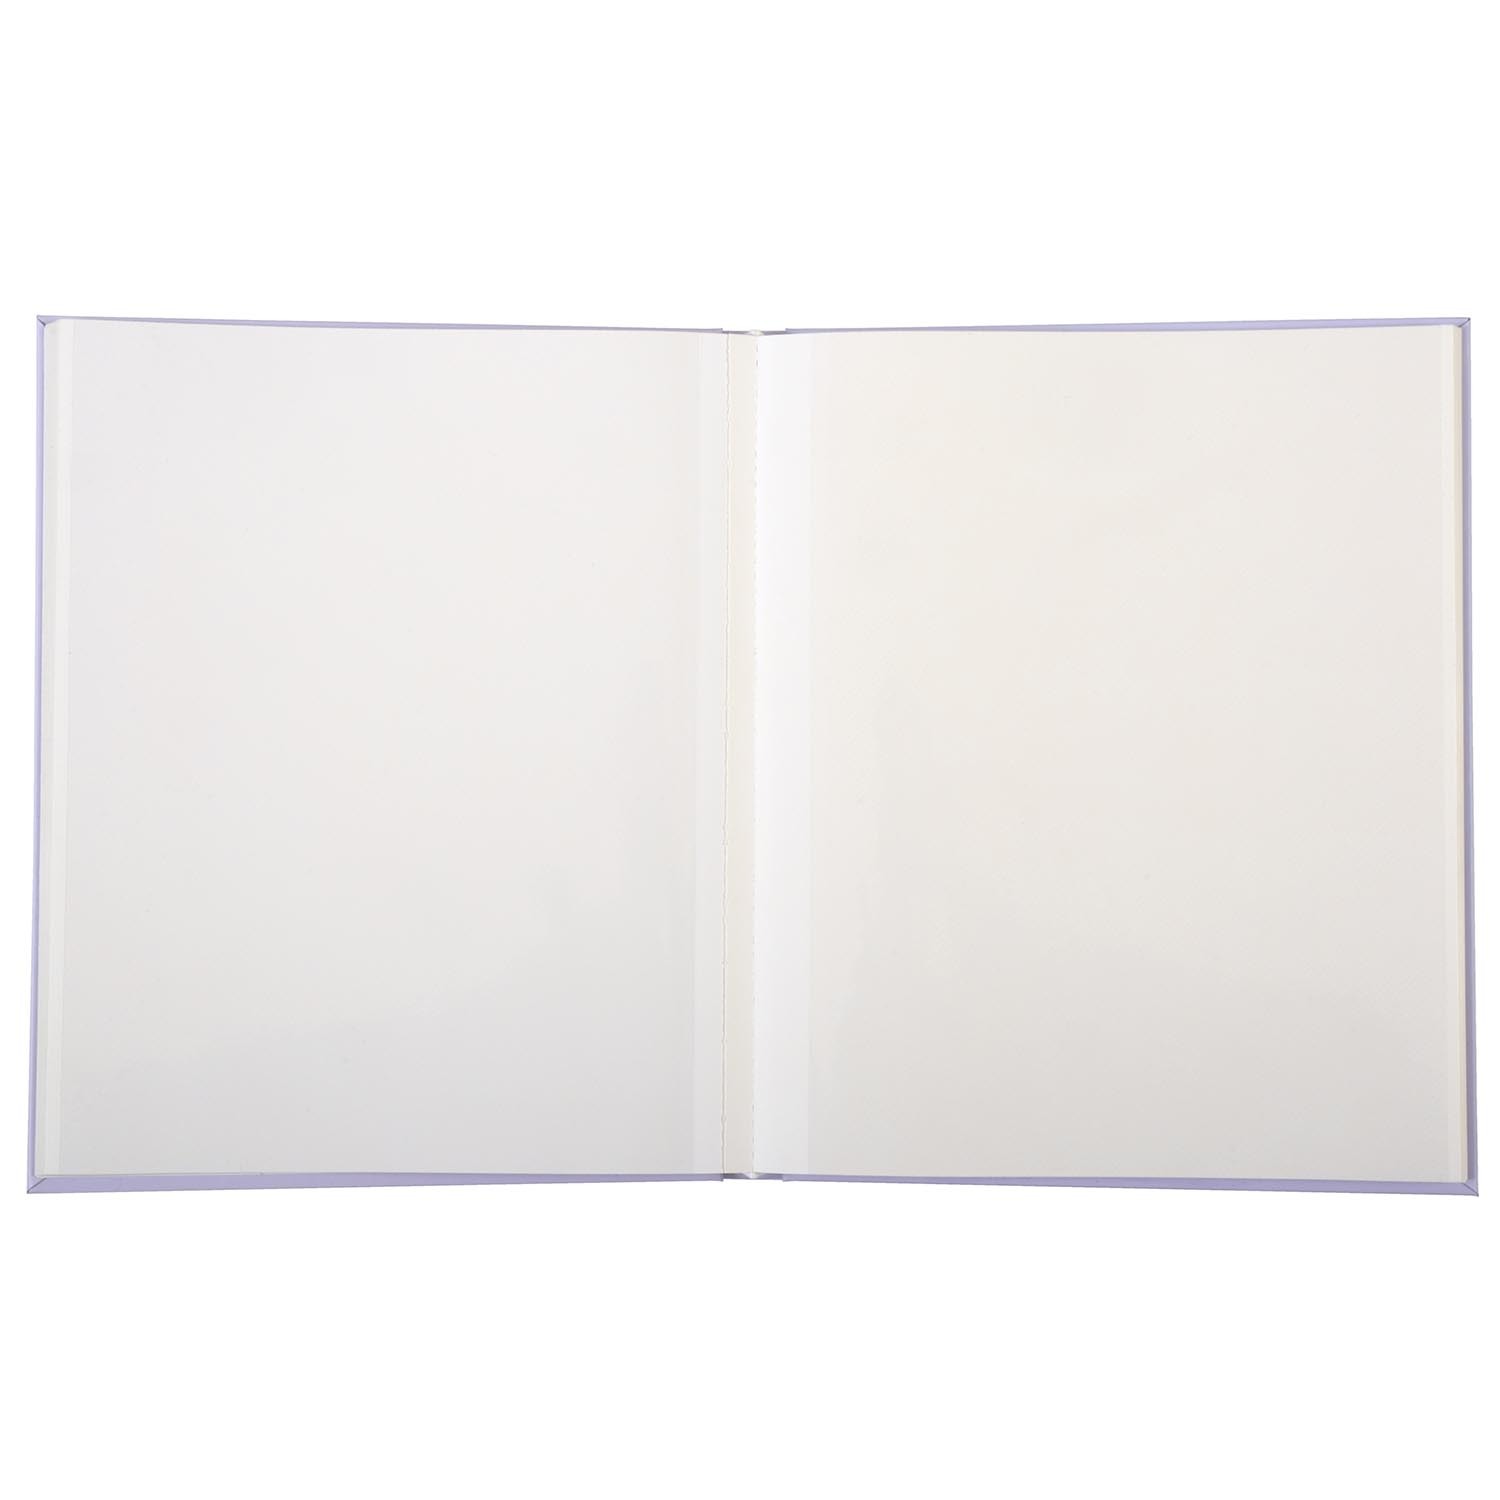 Single Pastel Photo Album 50 Pages in Assorted styles Image 6